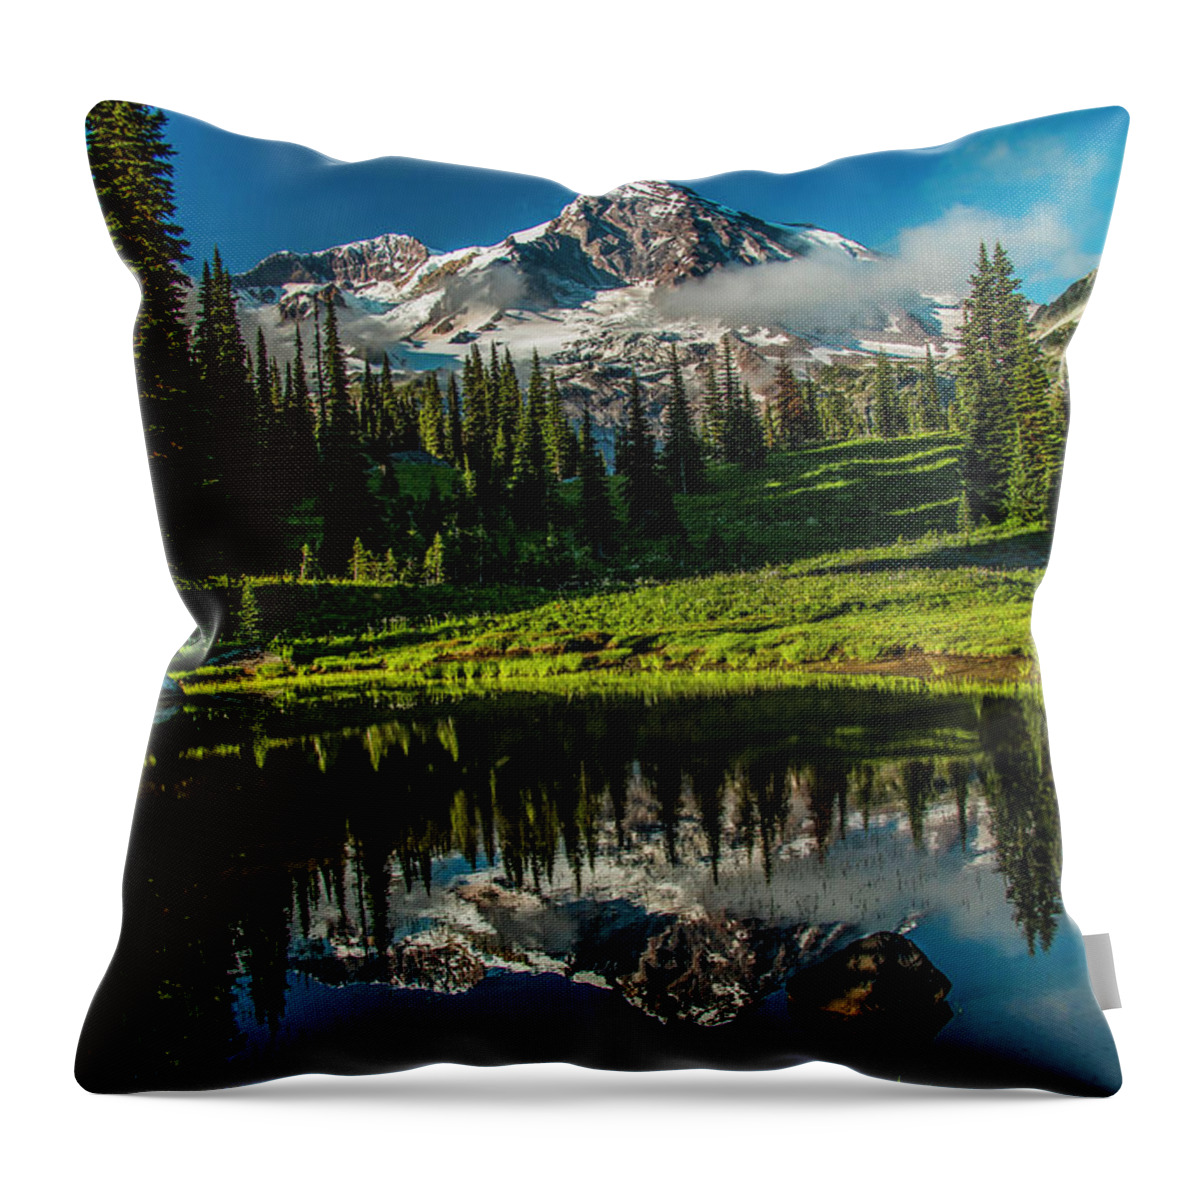 Mount Rainier Throw Pillow featuring the photograph Majestic Mountain Reflection by Doug Scrima